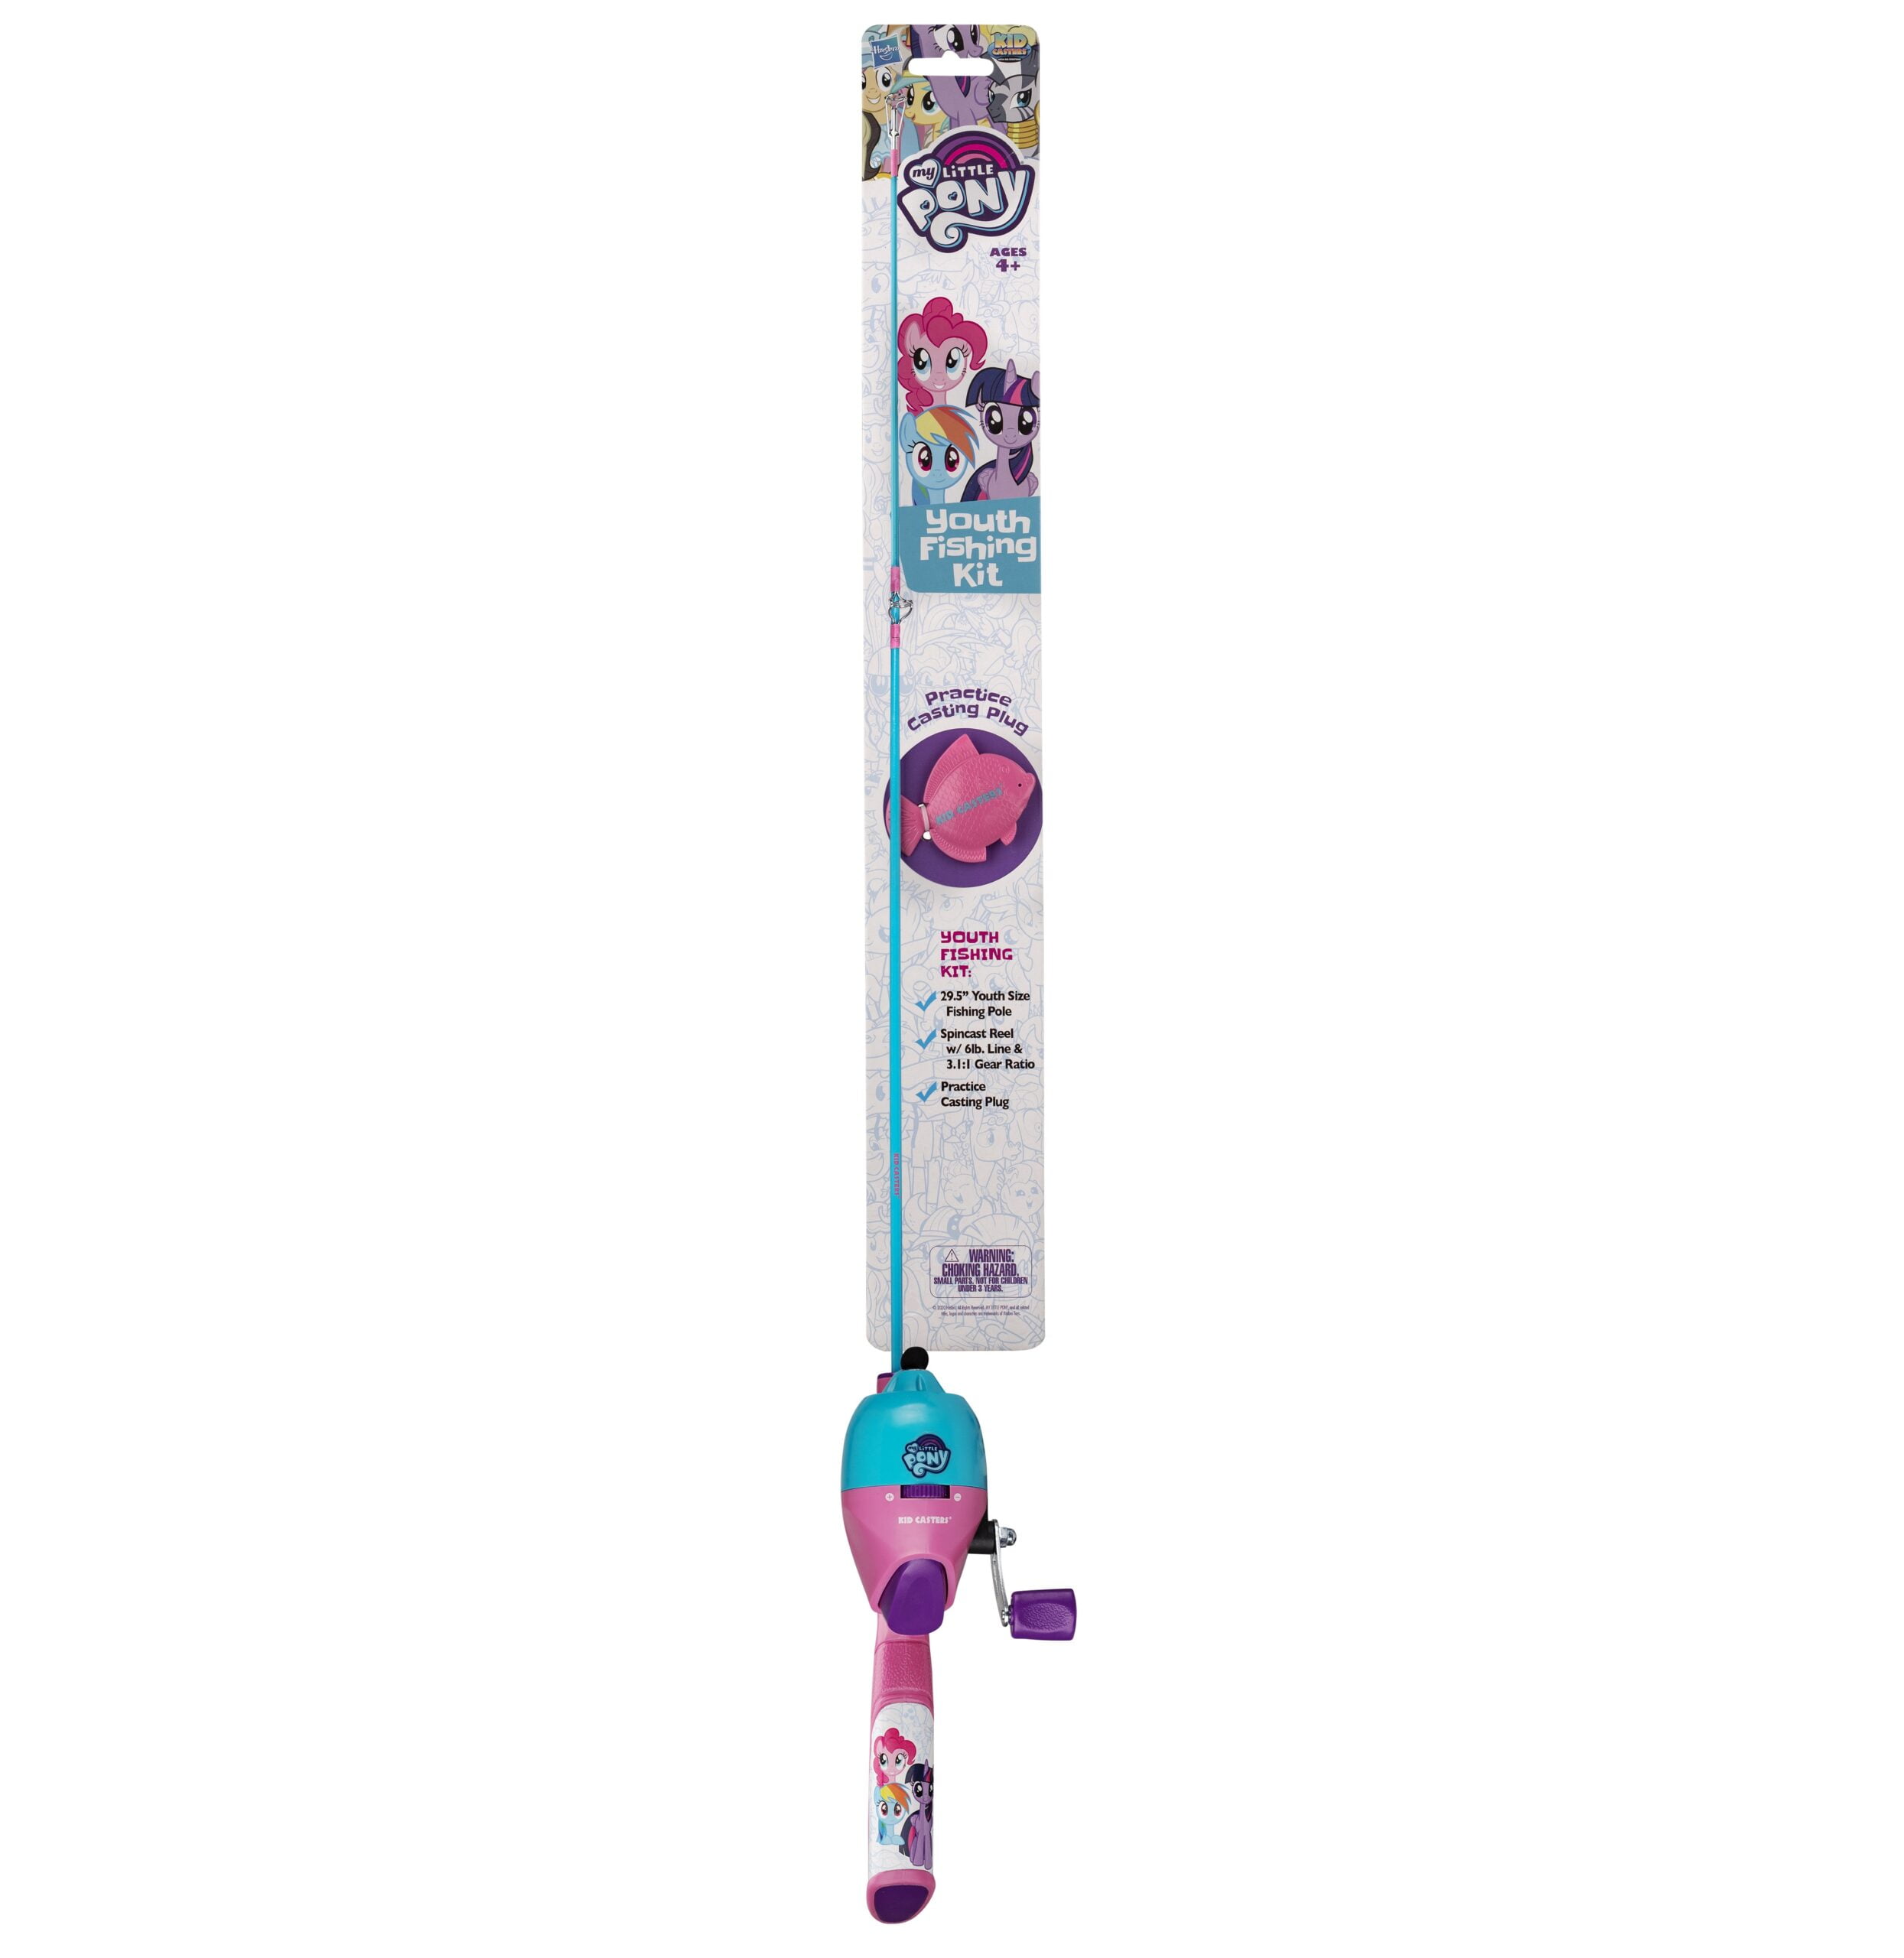 Paw Patrol Girls Fishing Kit, 29.5 Medium Action Rod, 3.1:1 gear ratio,  practice casting plug : Buy Online at Best Price in KSA - Souq is now  : Sporting Goods